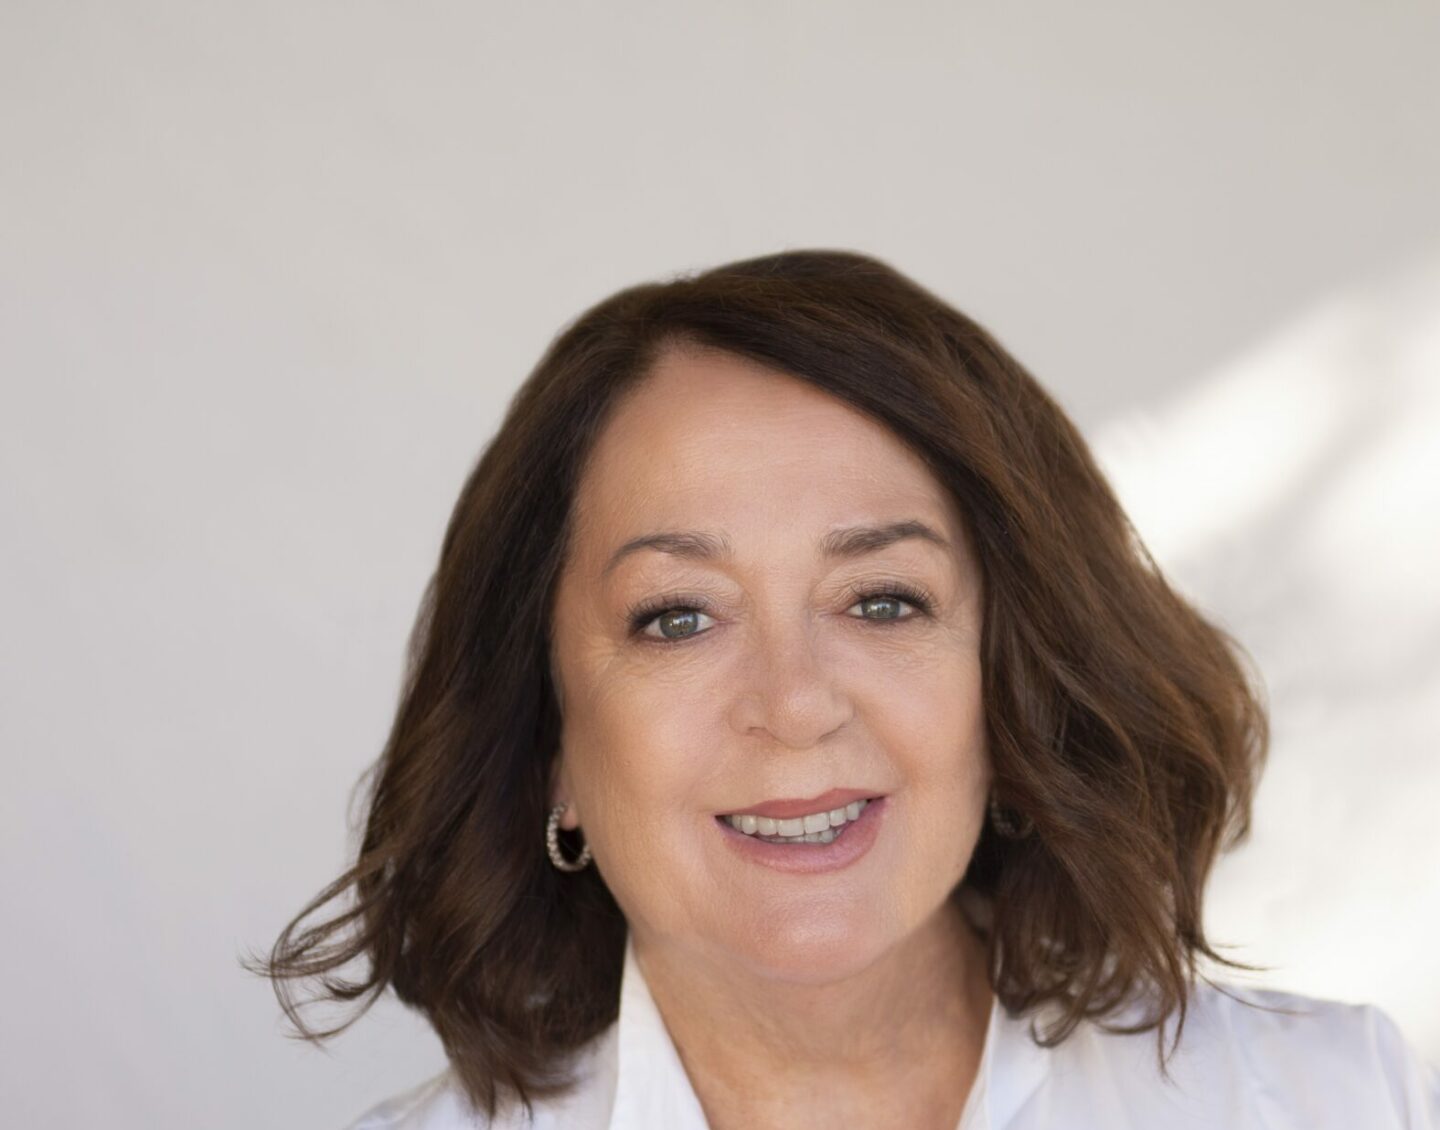 A middle-aged woman with shoulder-length brown hair and a white button up shirt smiles at the camera